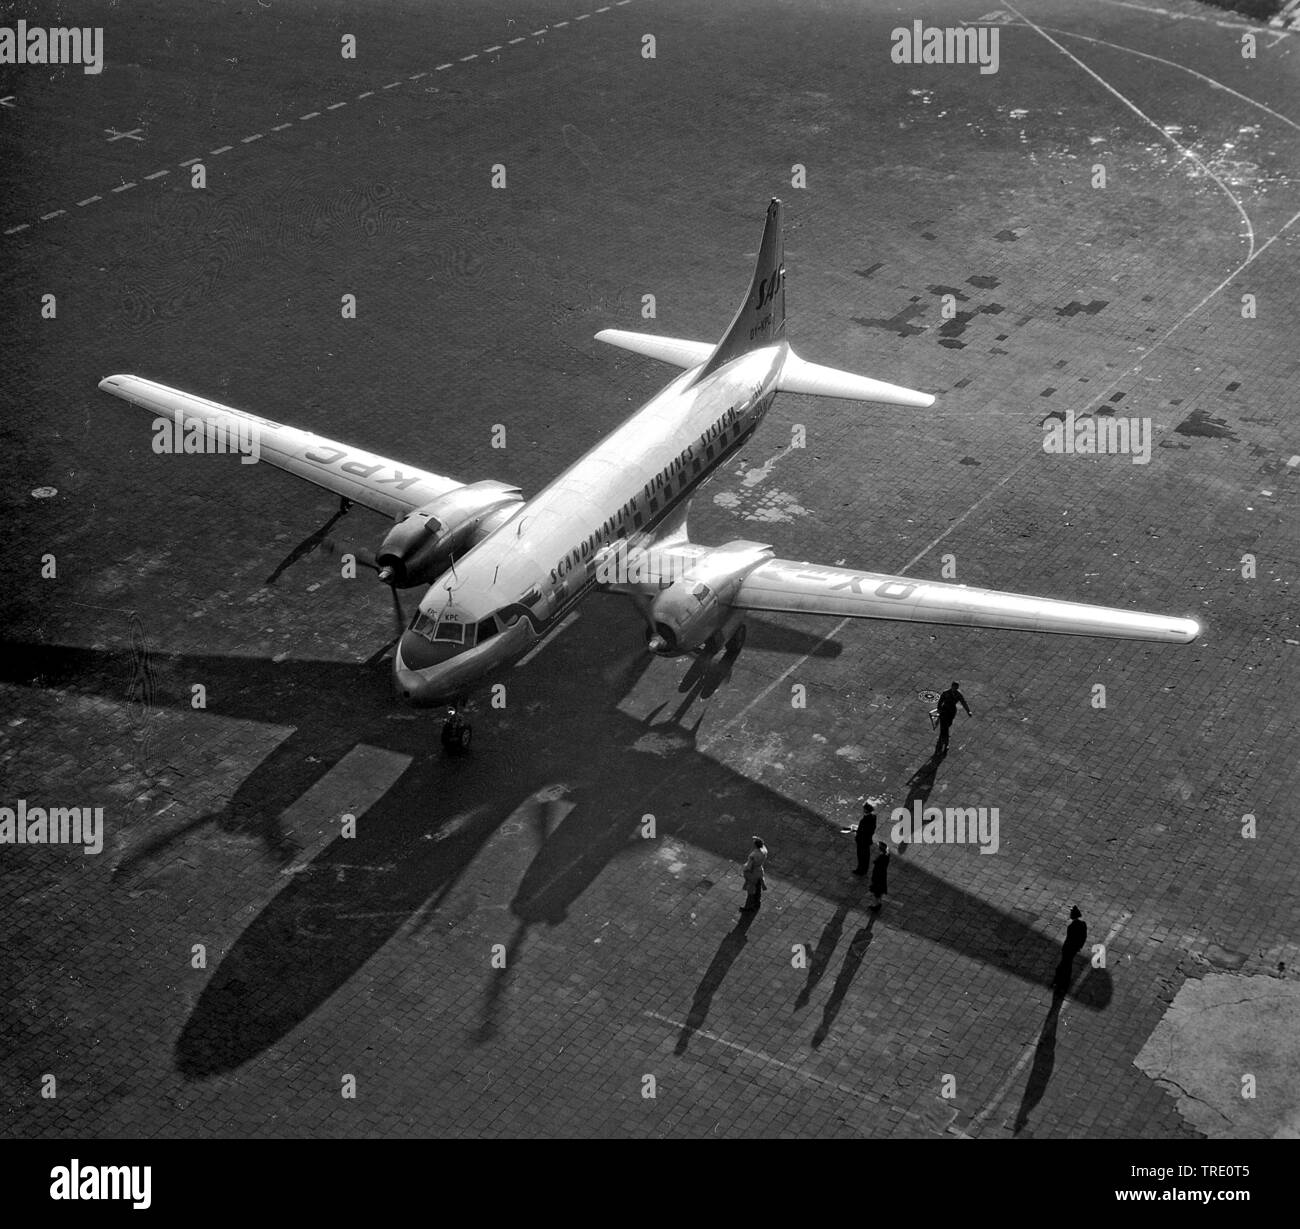 Convair 440 of SAS at airport Munich Riem, historical aerial photo, 20.08.1962, Germany, Bavaria, Muenchen Stock Photo